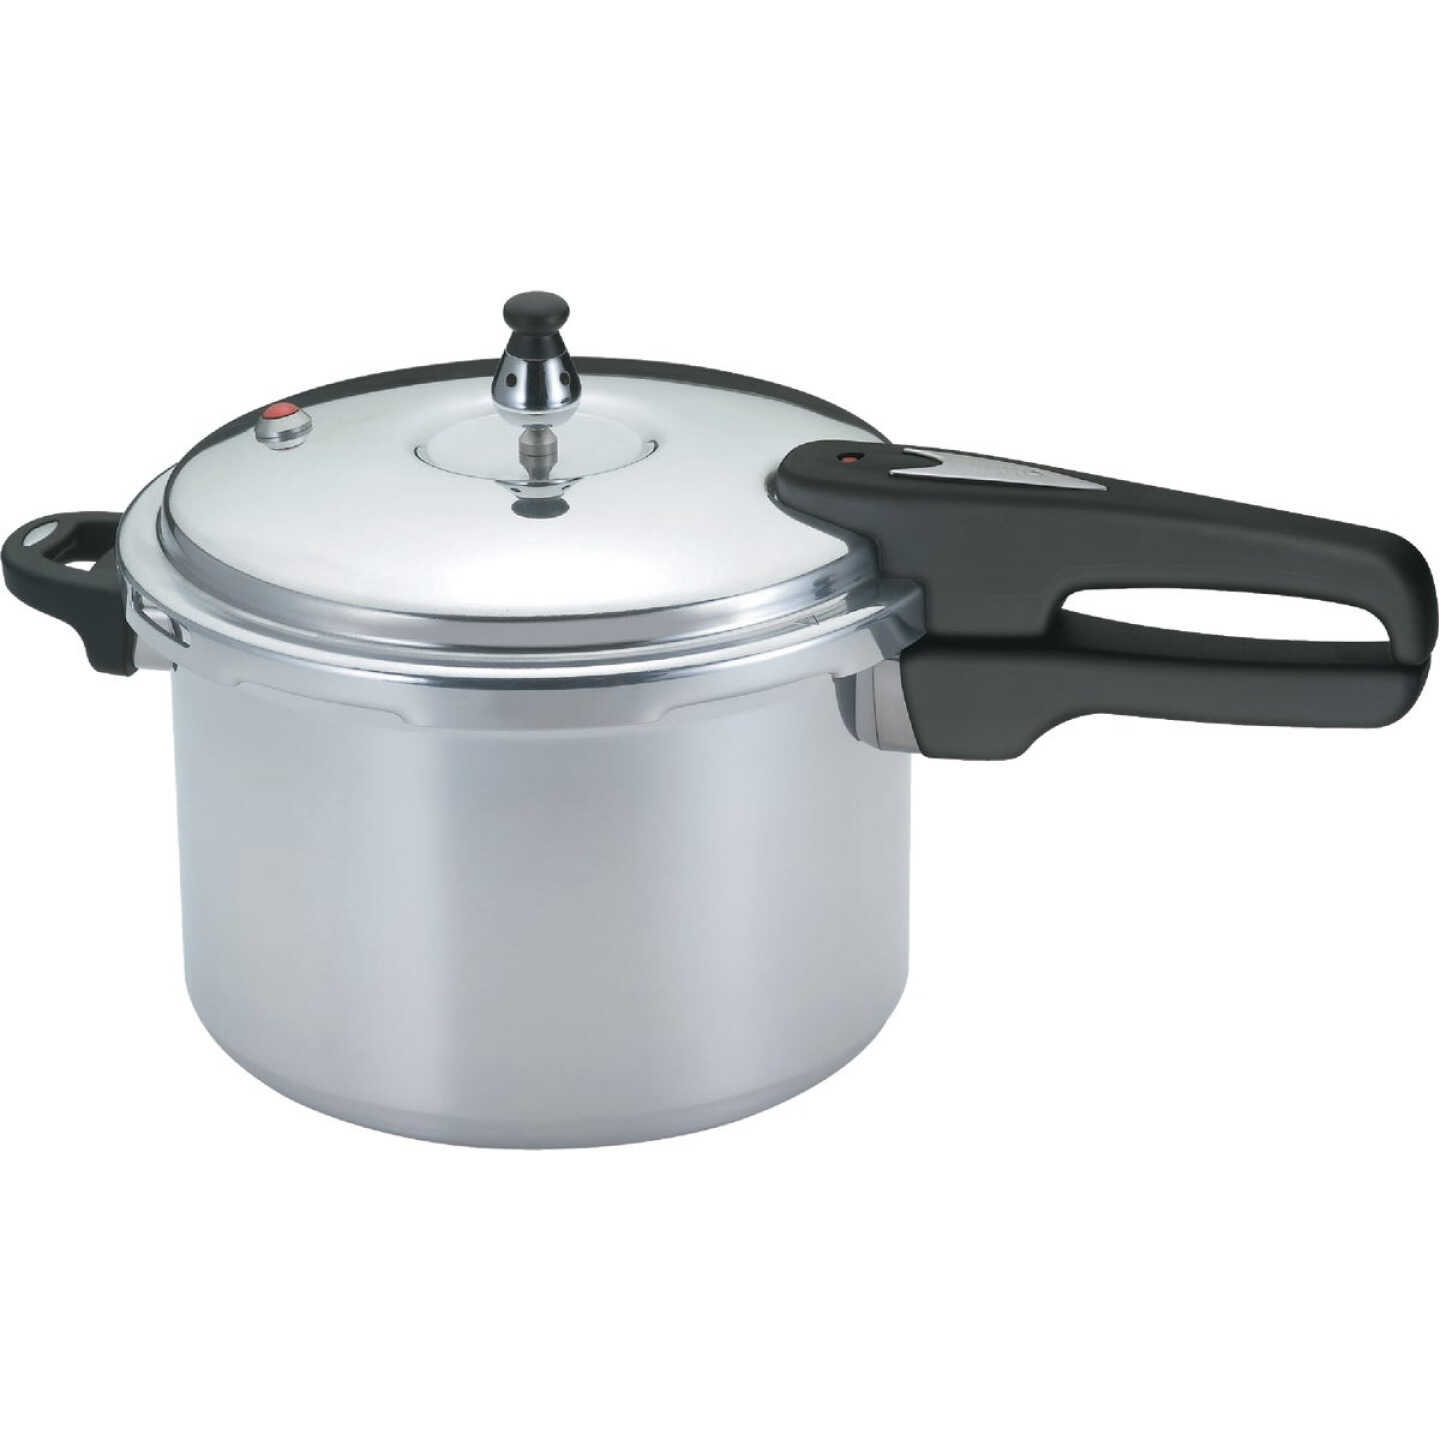 Imusa 4.2Qt Stovetop Aluminum Pressure Cooker with Safety Regulator